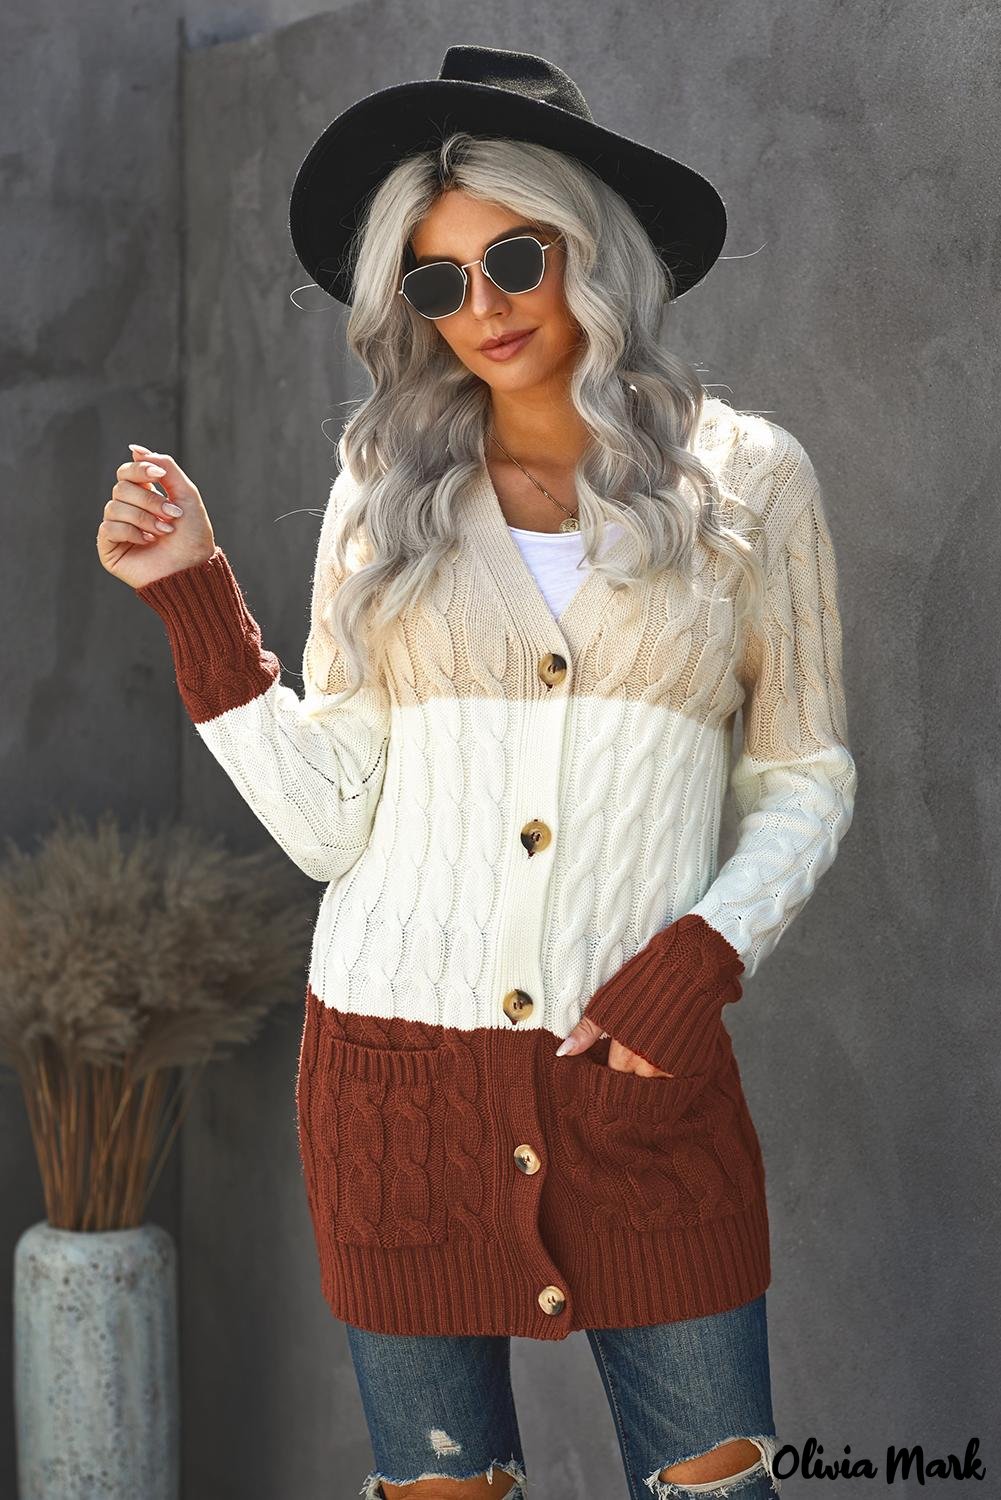 Olivia Mark - Apricot color block knit cardigan with buttoned pocket